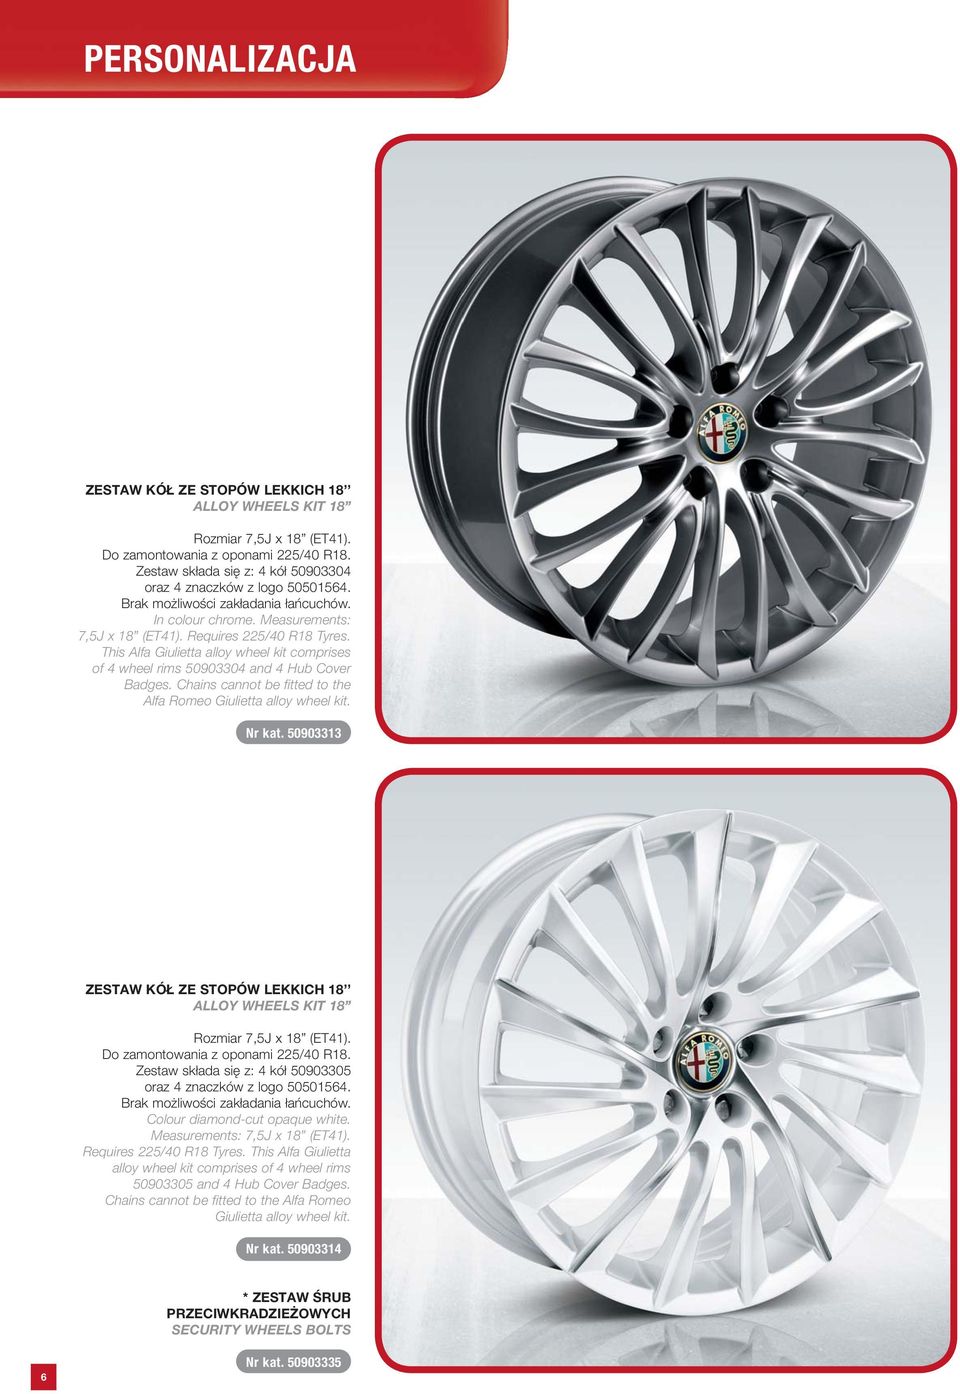 This Alfa Giulietta alloy wheel kit comprises of 4 wheel rims 50903304 and 4 Hub Cover Badges. Chains cannot be fitted to the Alfa Romeo Giulietta alloy wheel kit. Nr kat.